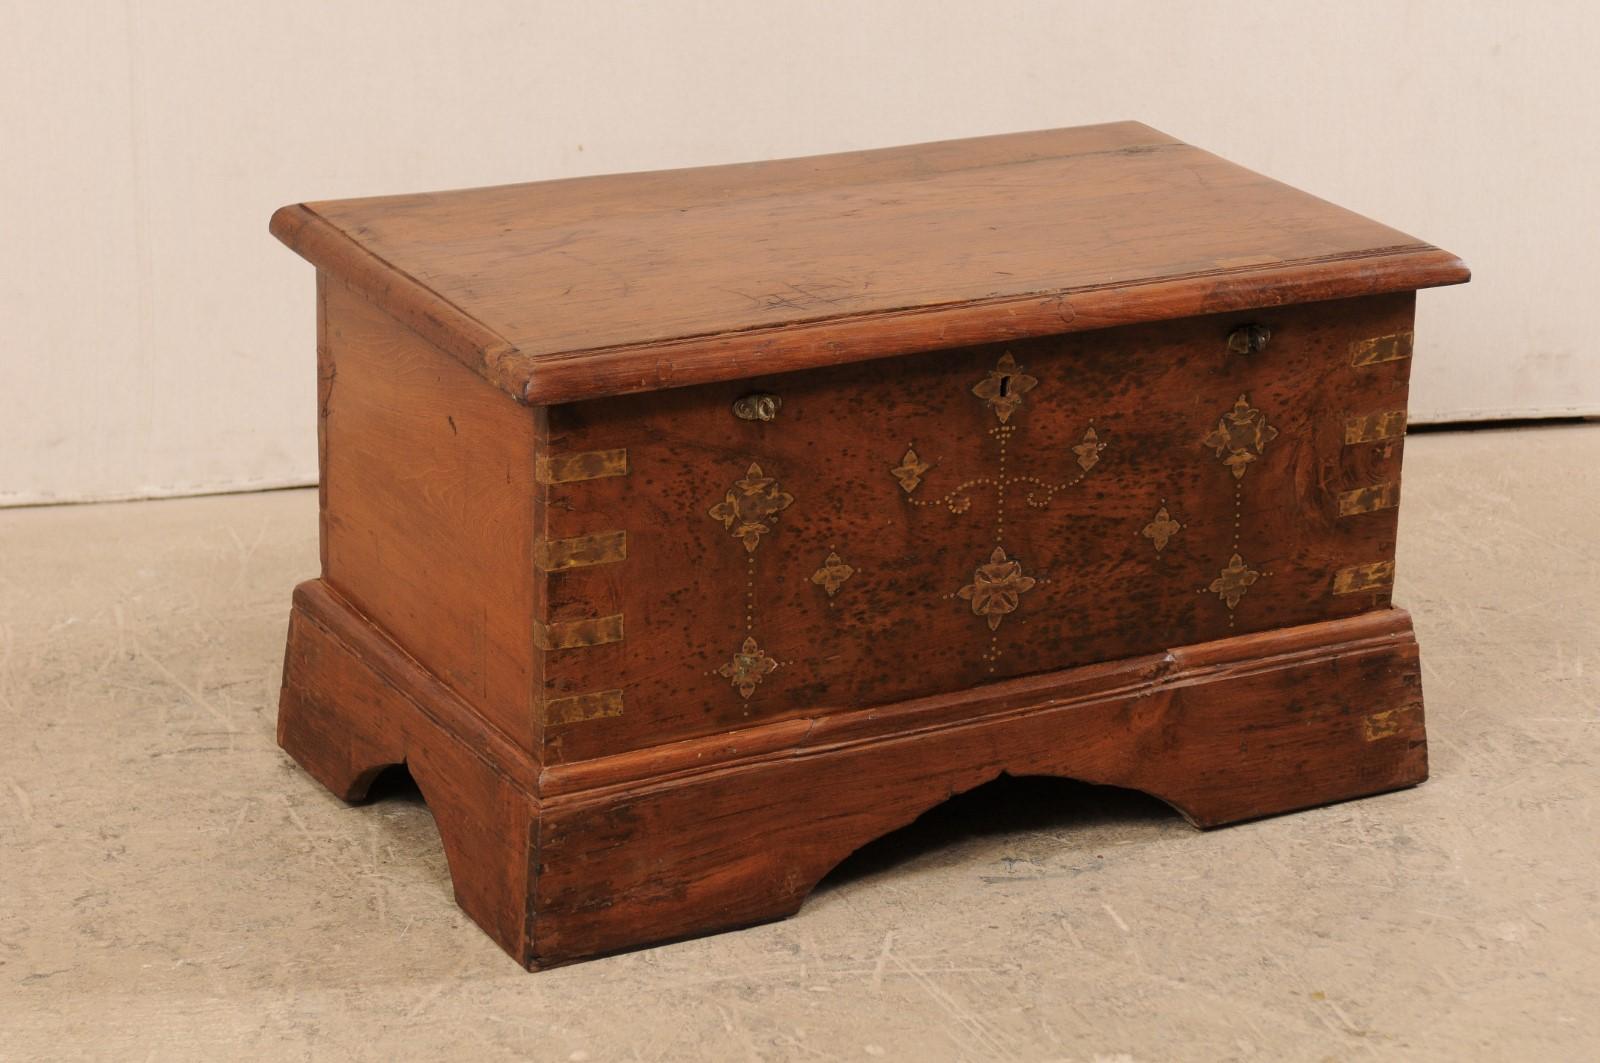 A British Colonial chest, which could function well as a small coffee table, from the early 20th century. This antique British Colonial keep-sake trunk of jack-wood is nicely adorn with a floral motif brass inlay pattern about it's front-facing